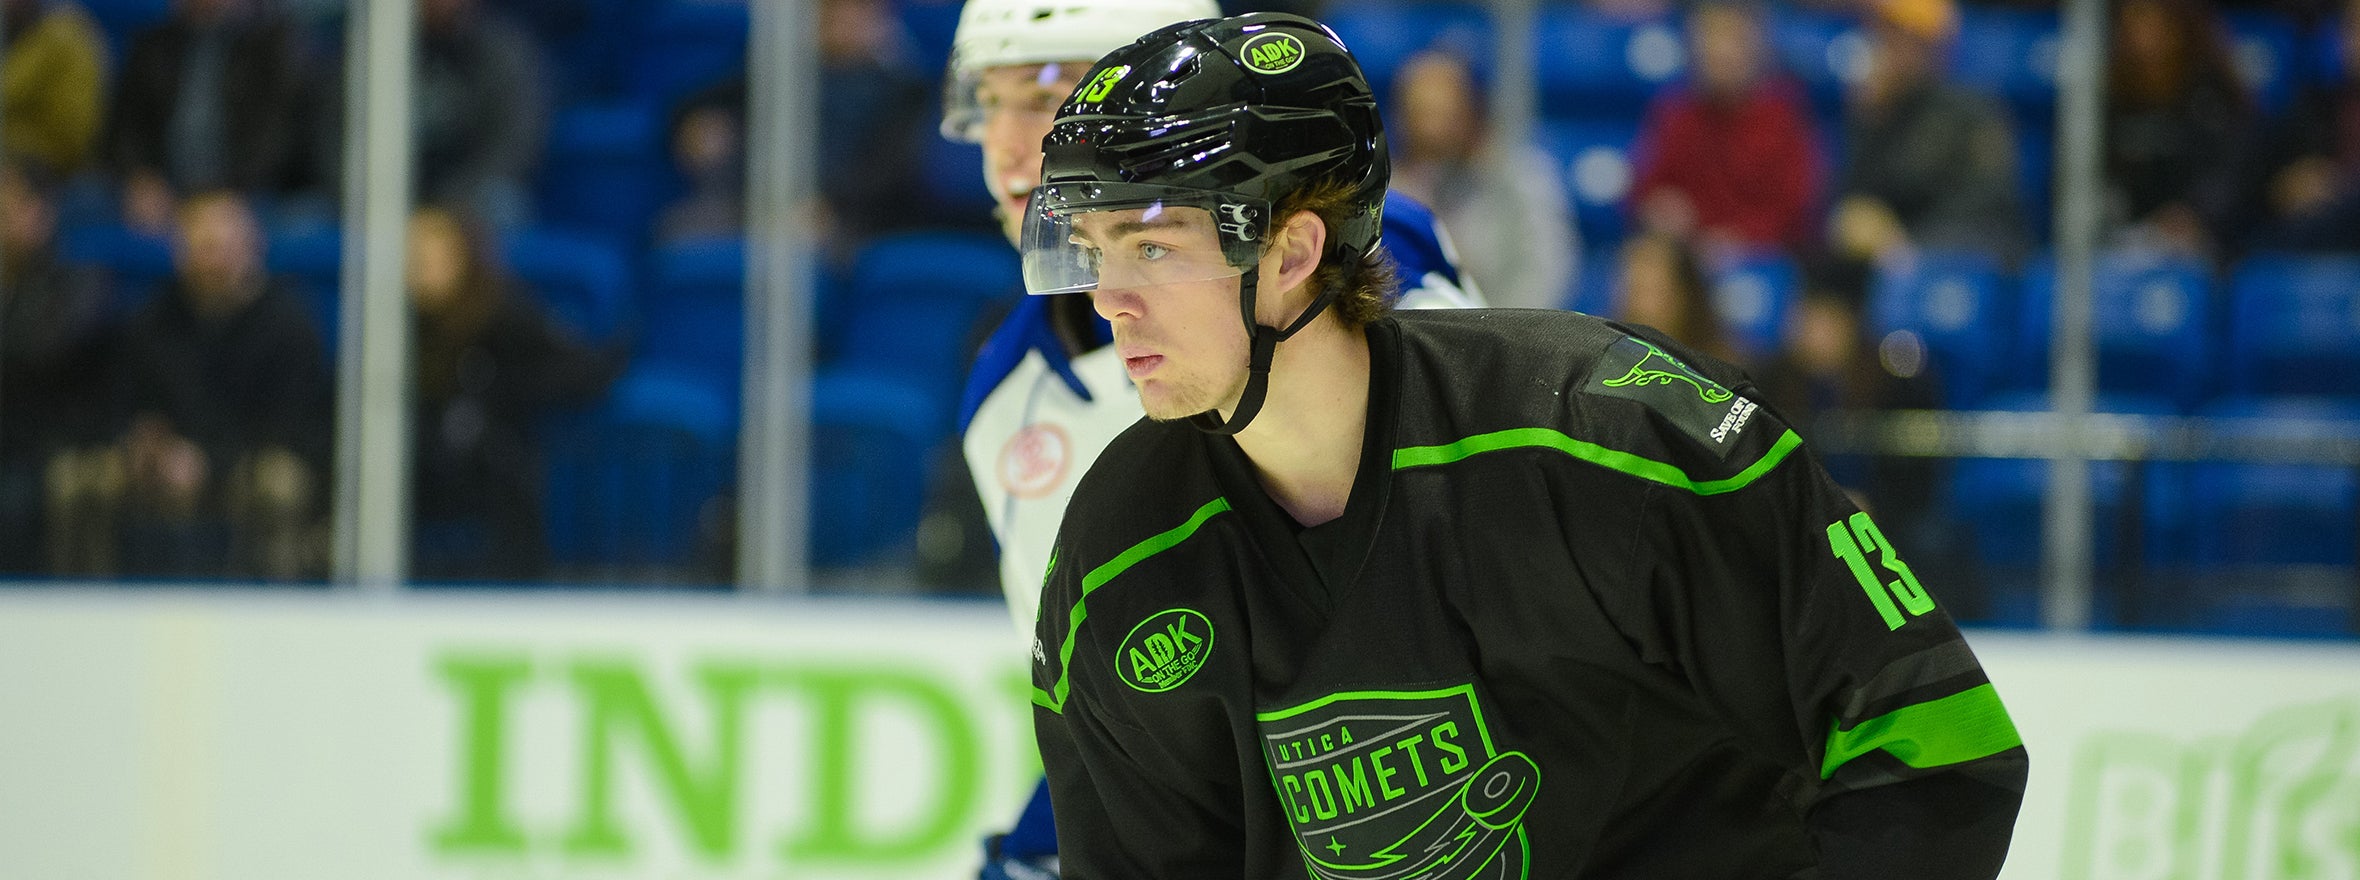 YOUNG GUNS LEAD COMETS TO VICTORY OVER CRUNCH